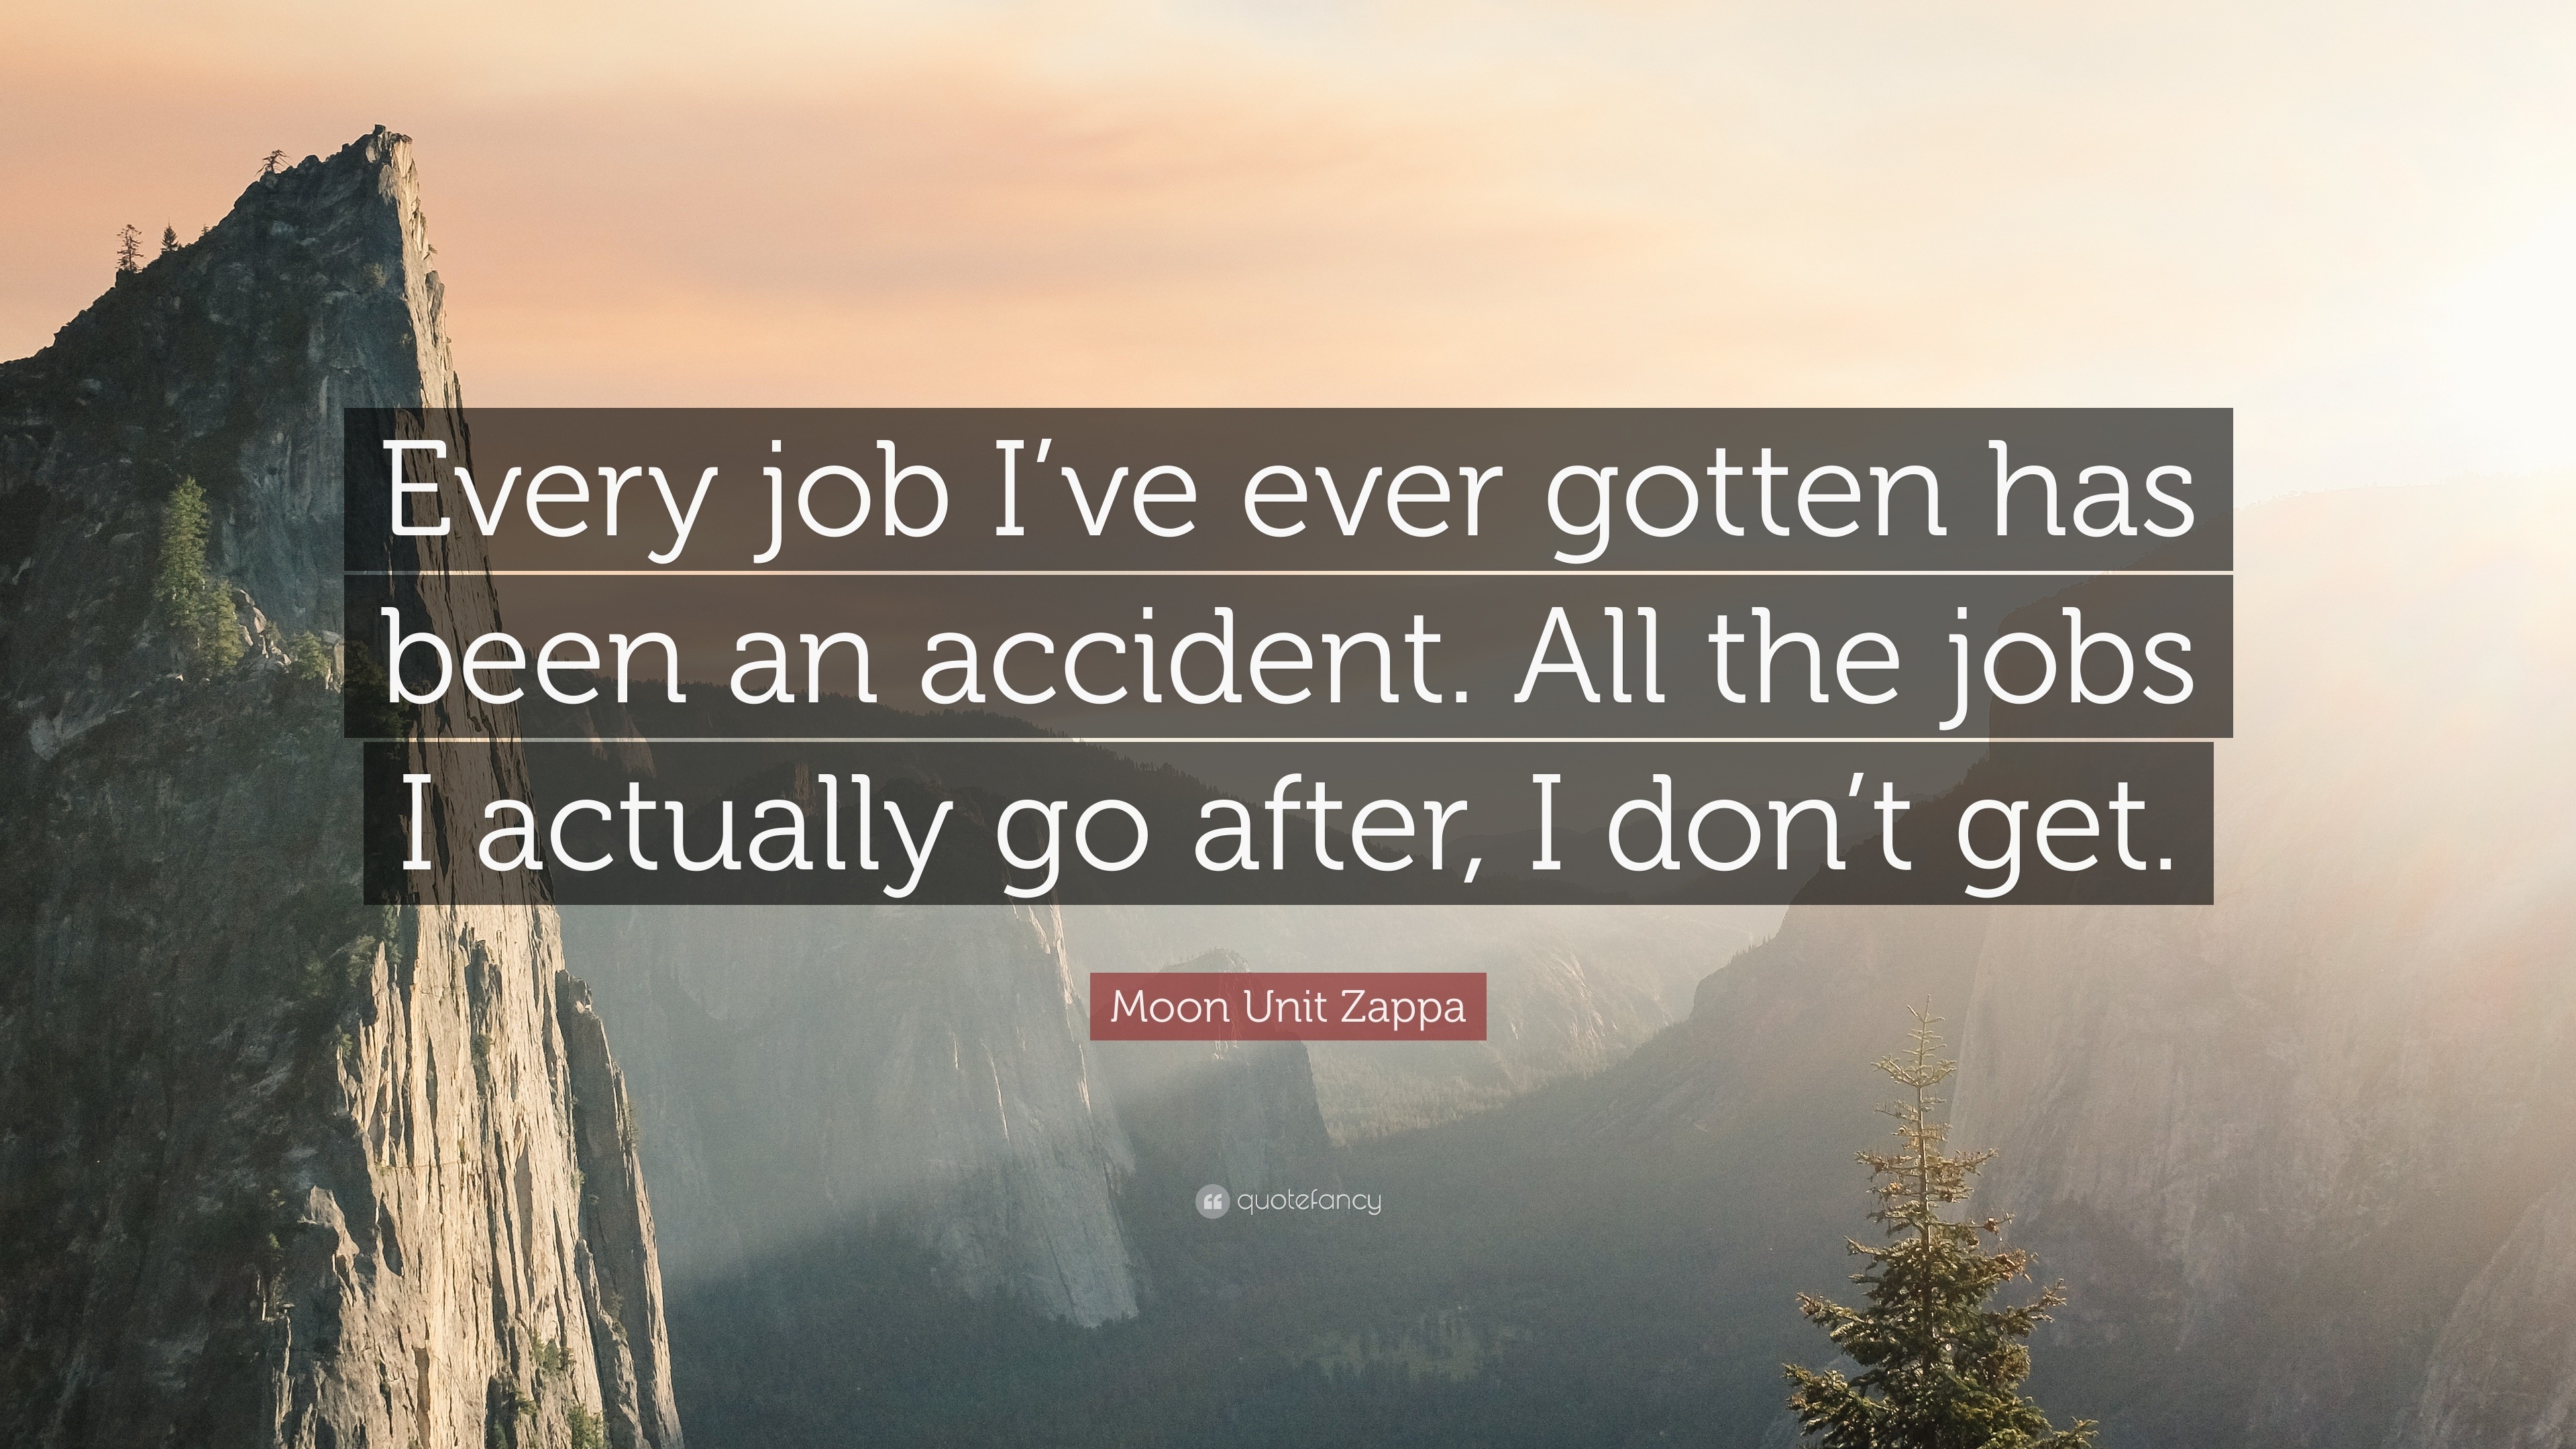 Moon Unit Zappa Quote: “Every job I’ve ever gotten has been an accident